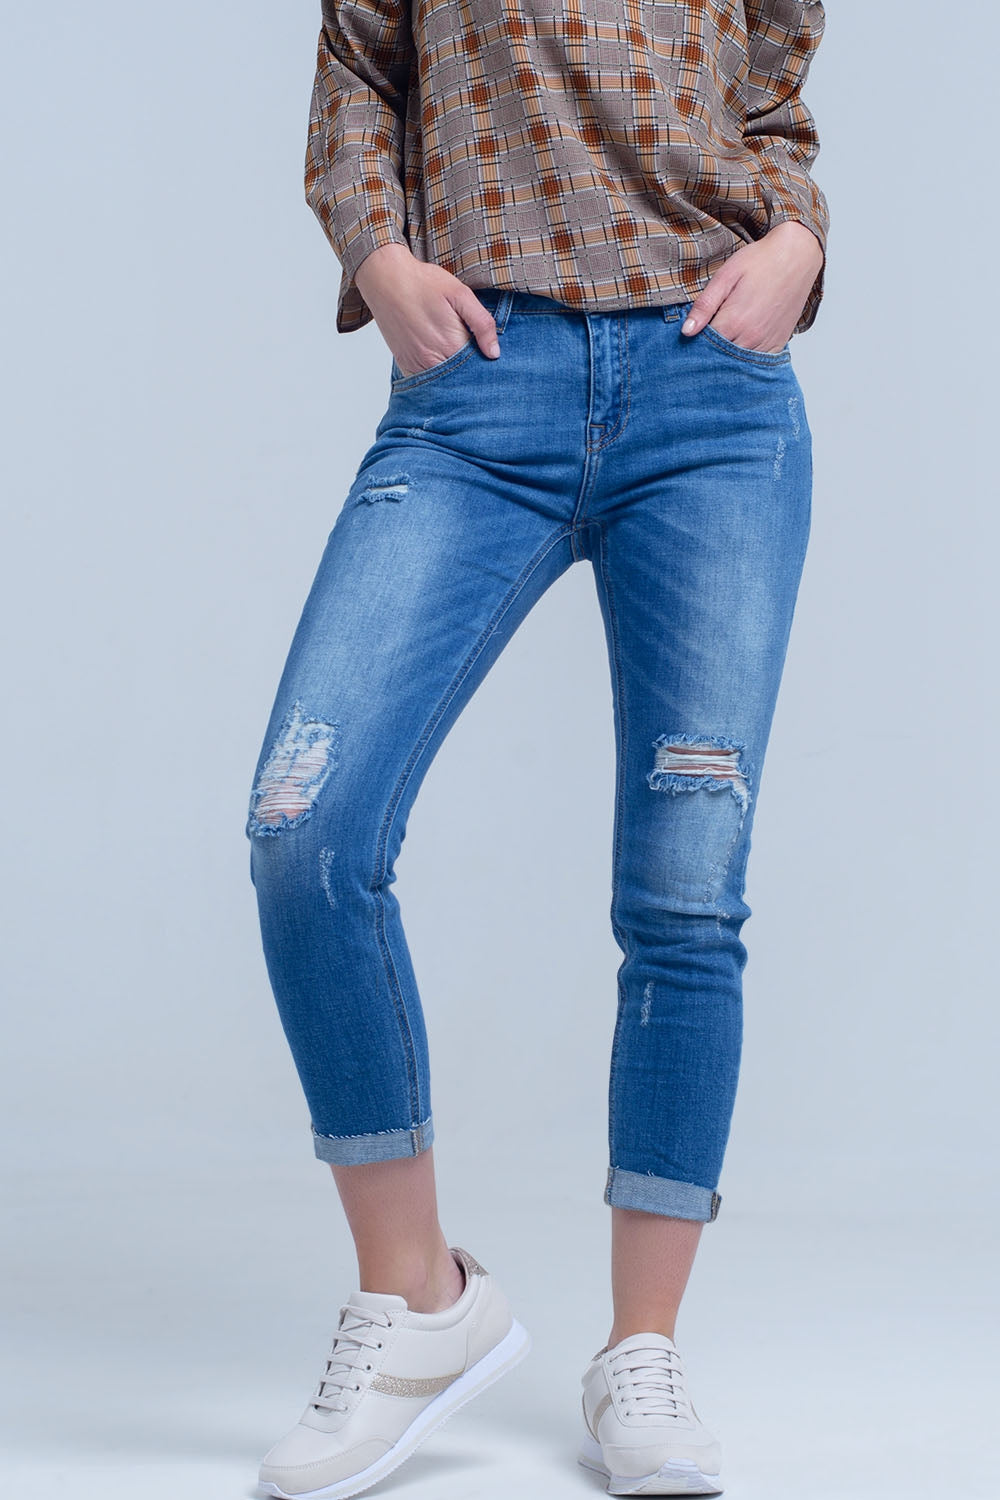 Jean skinny with rips on the legs Szua Store